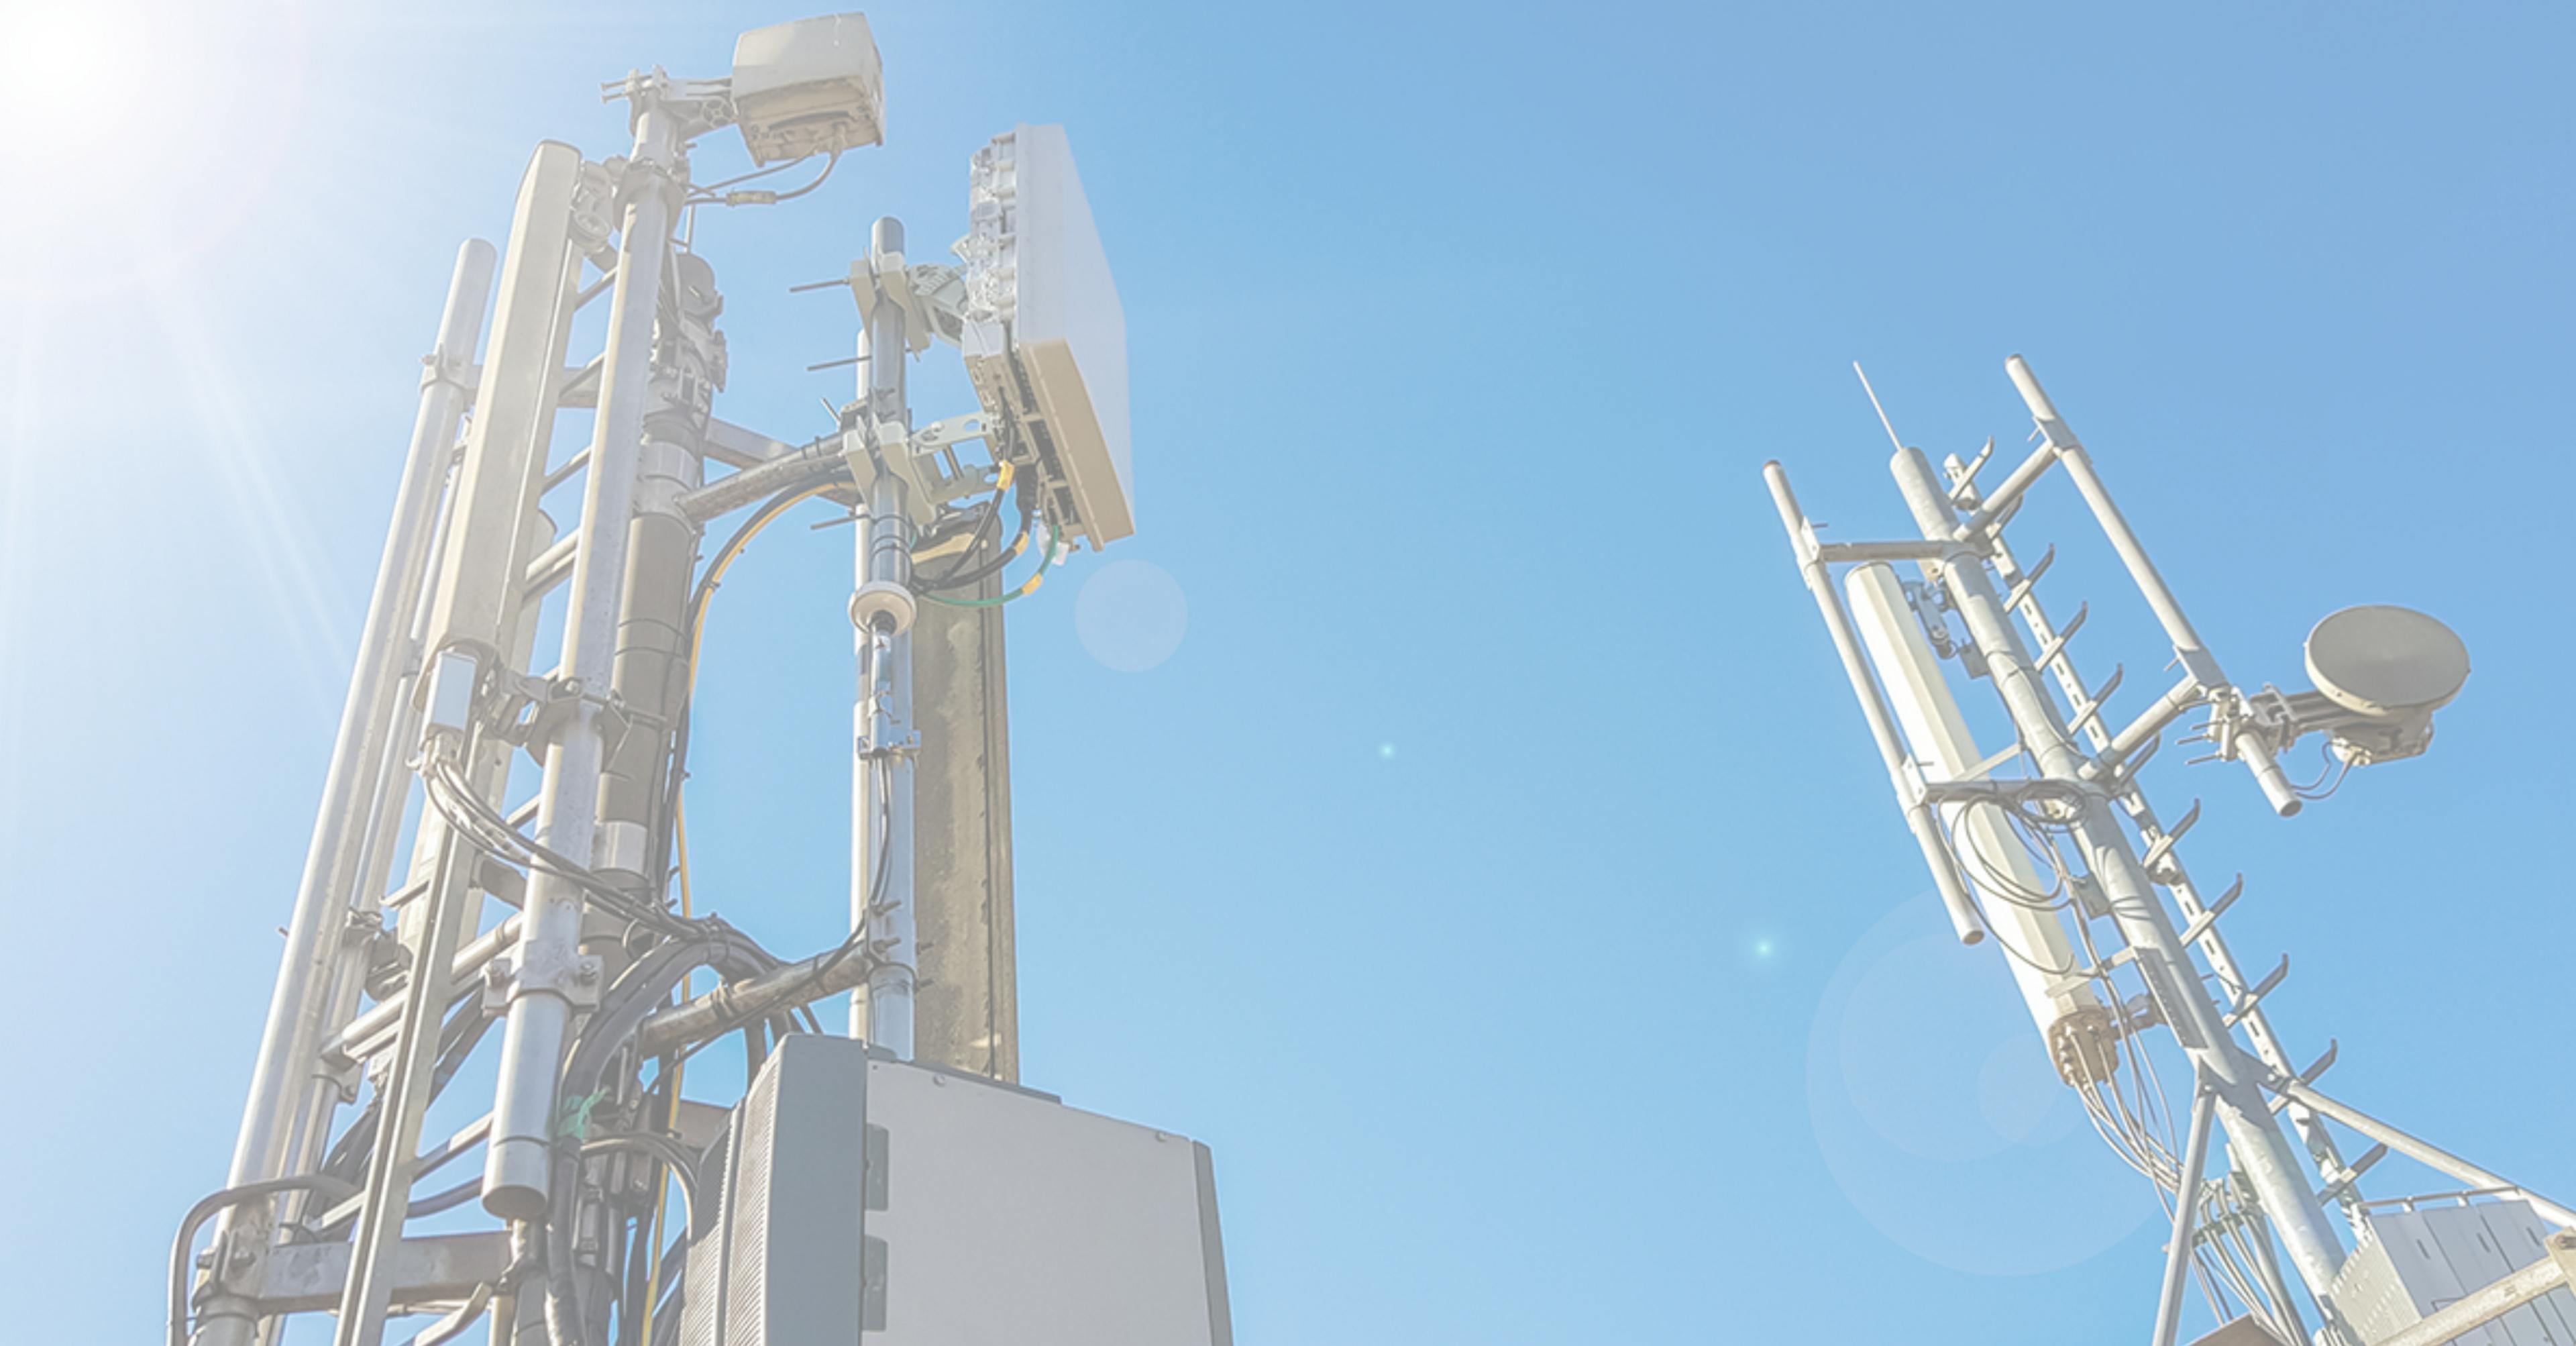 featured image - 5G Networks Can Change The Way We Live: For Better or Worse?